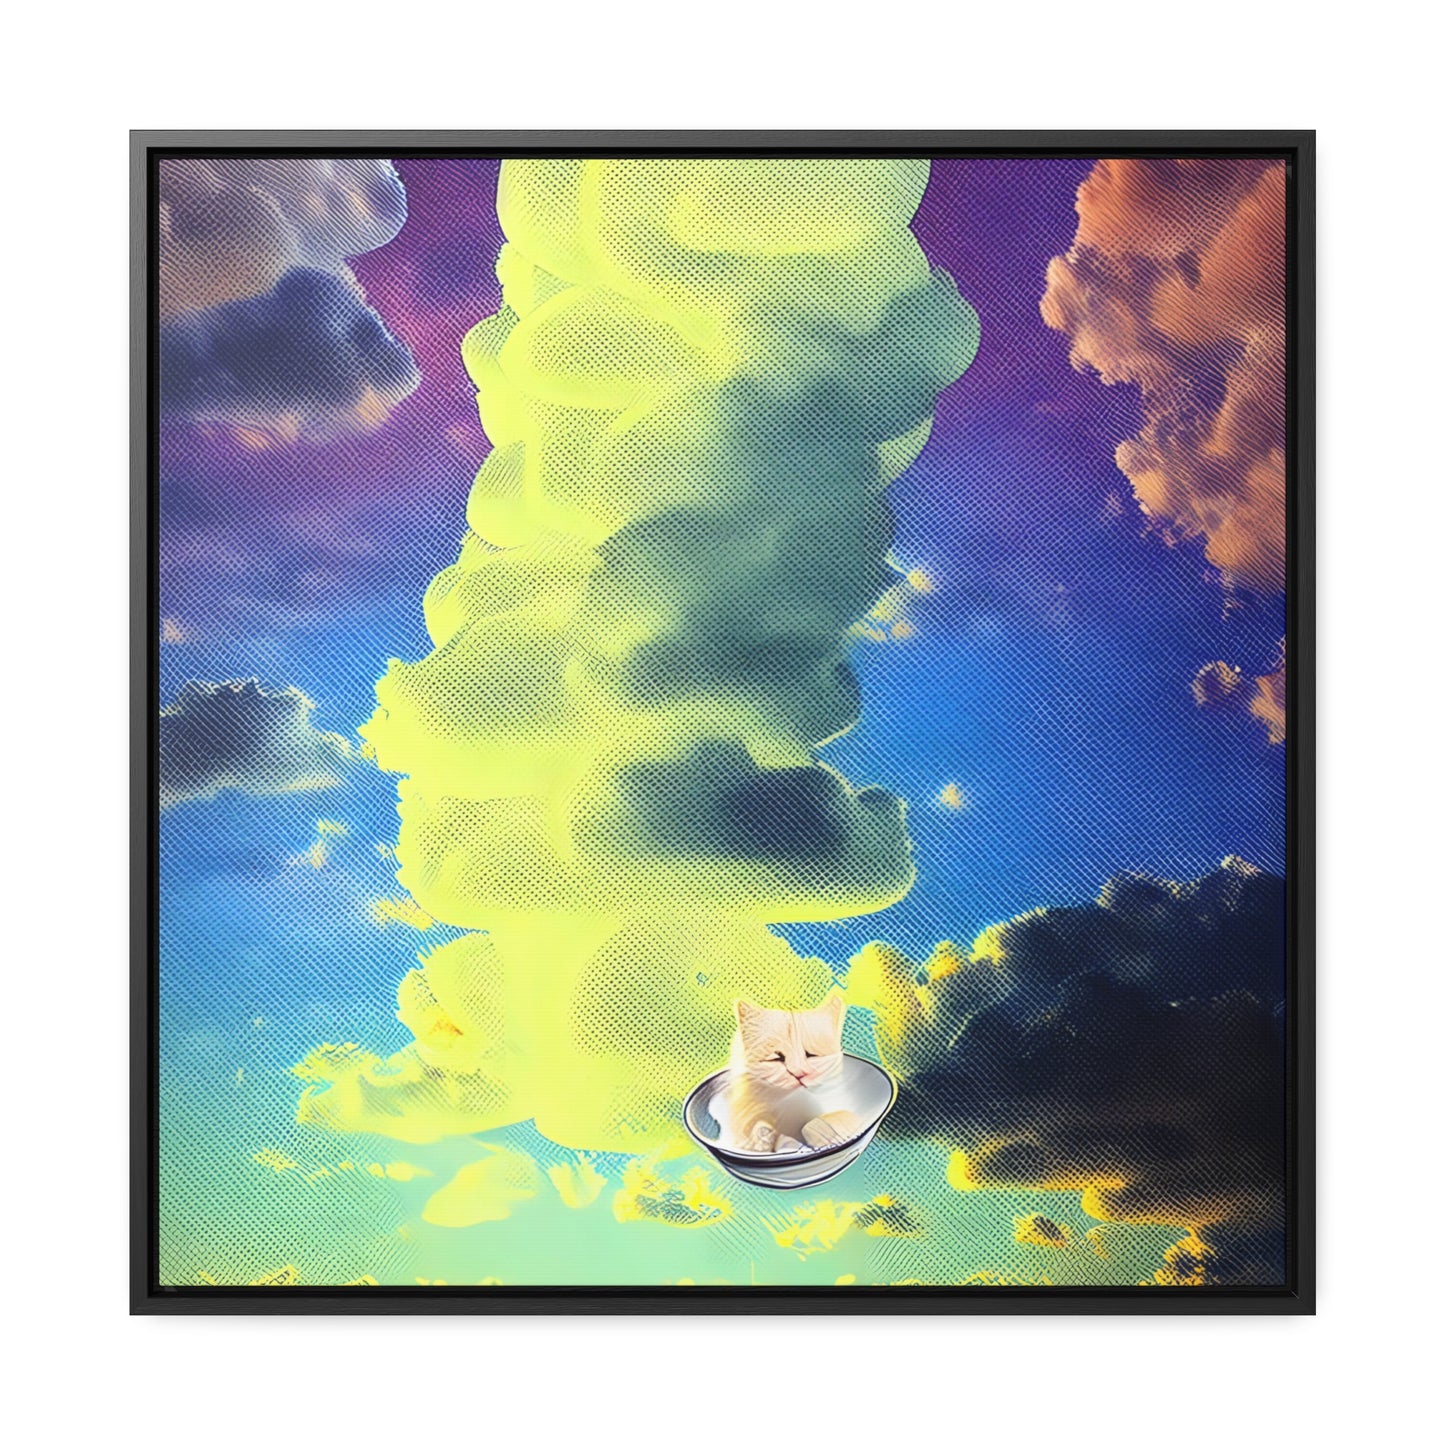 Kitten In The Clouds - Framed Gallery Canvas